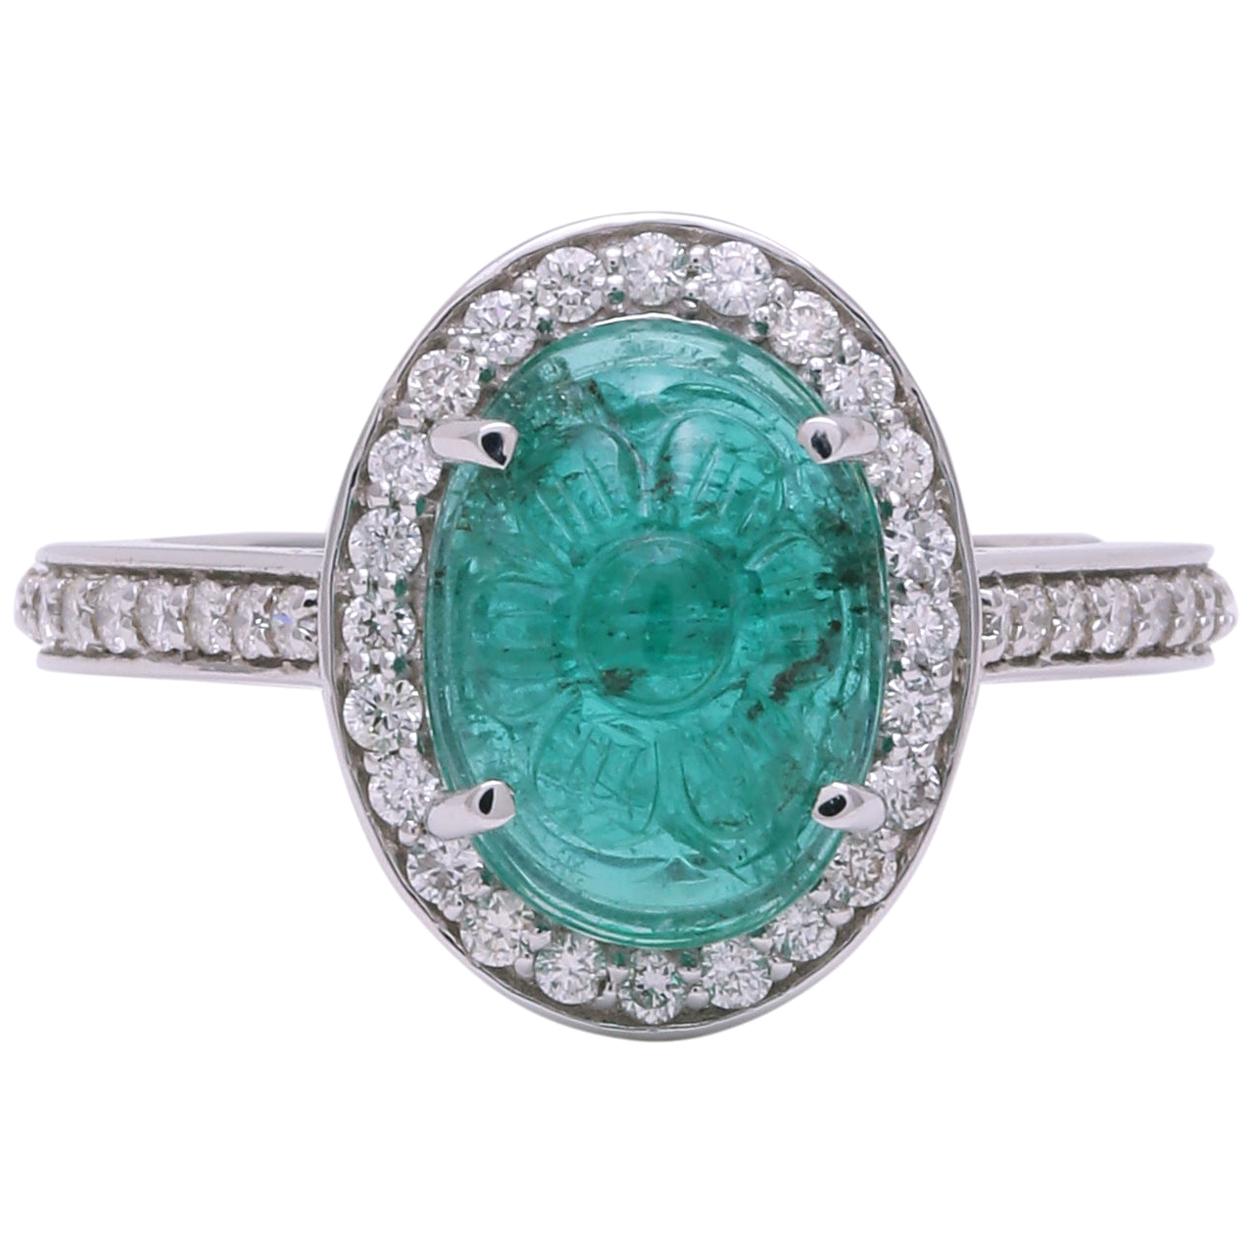 Hand Carved Emerald Cabochon Ring with Diamond Set in 18 Karat White Gold